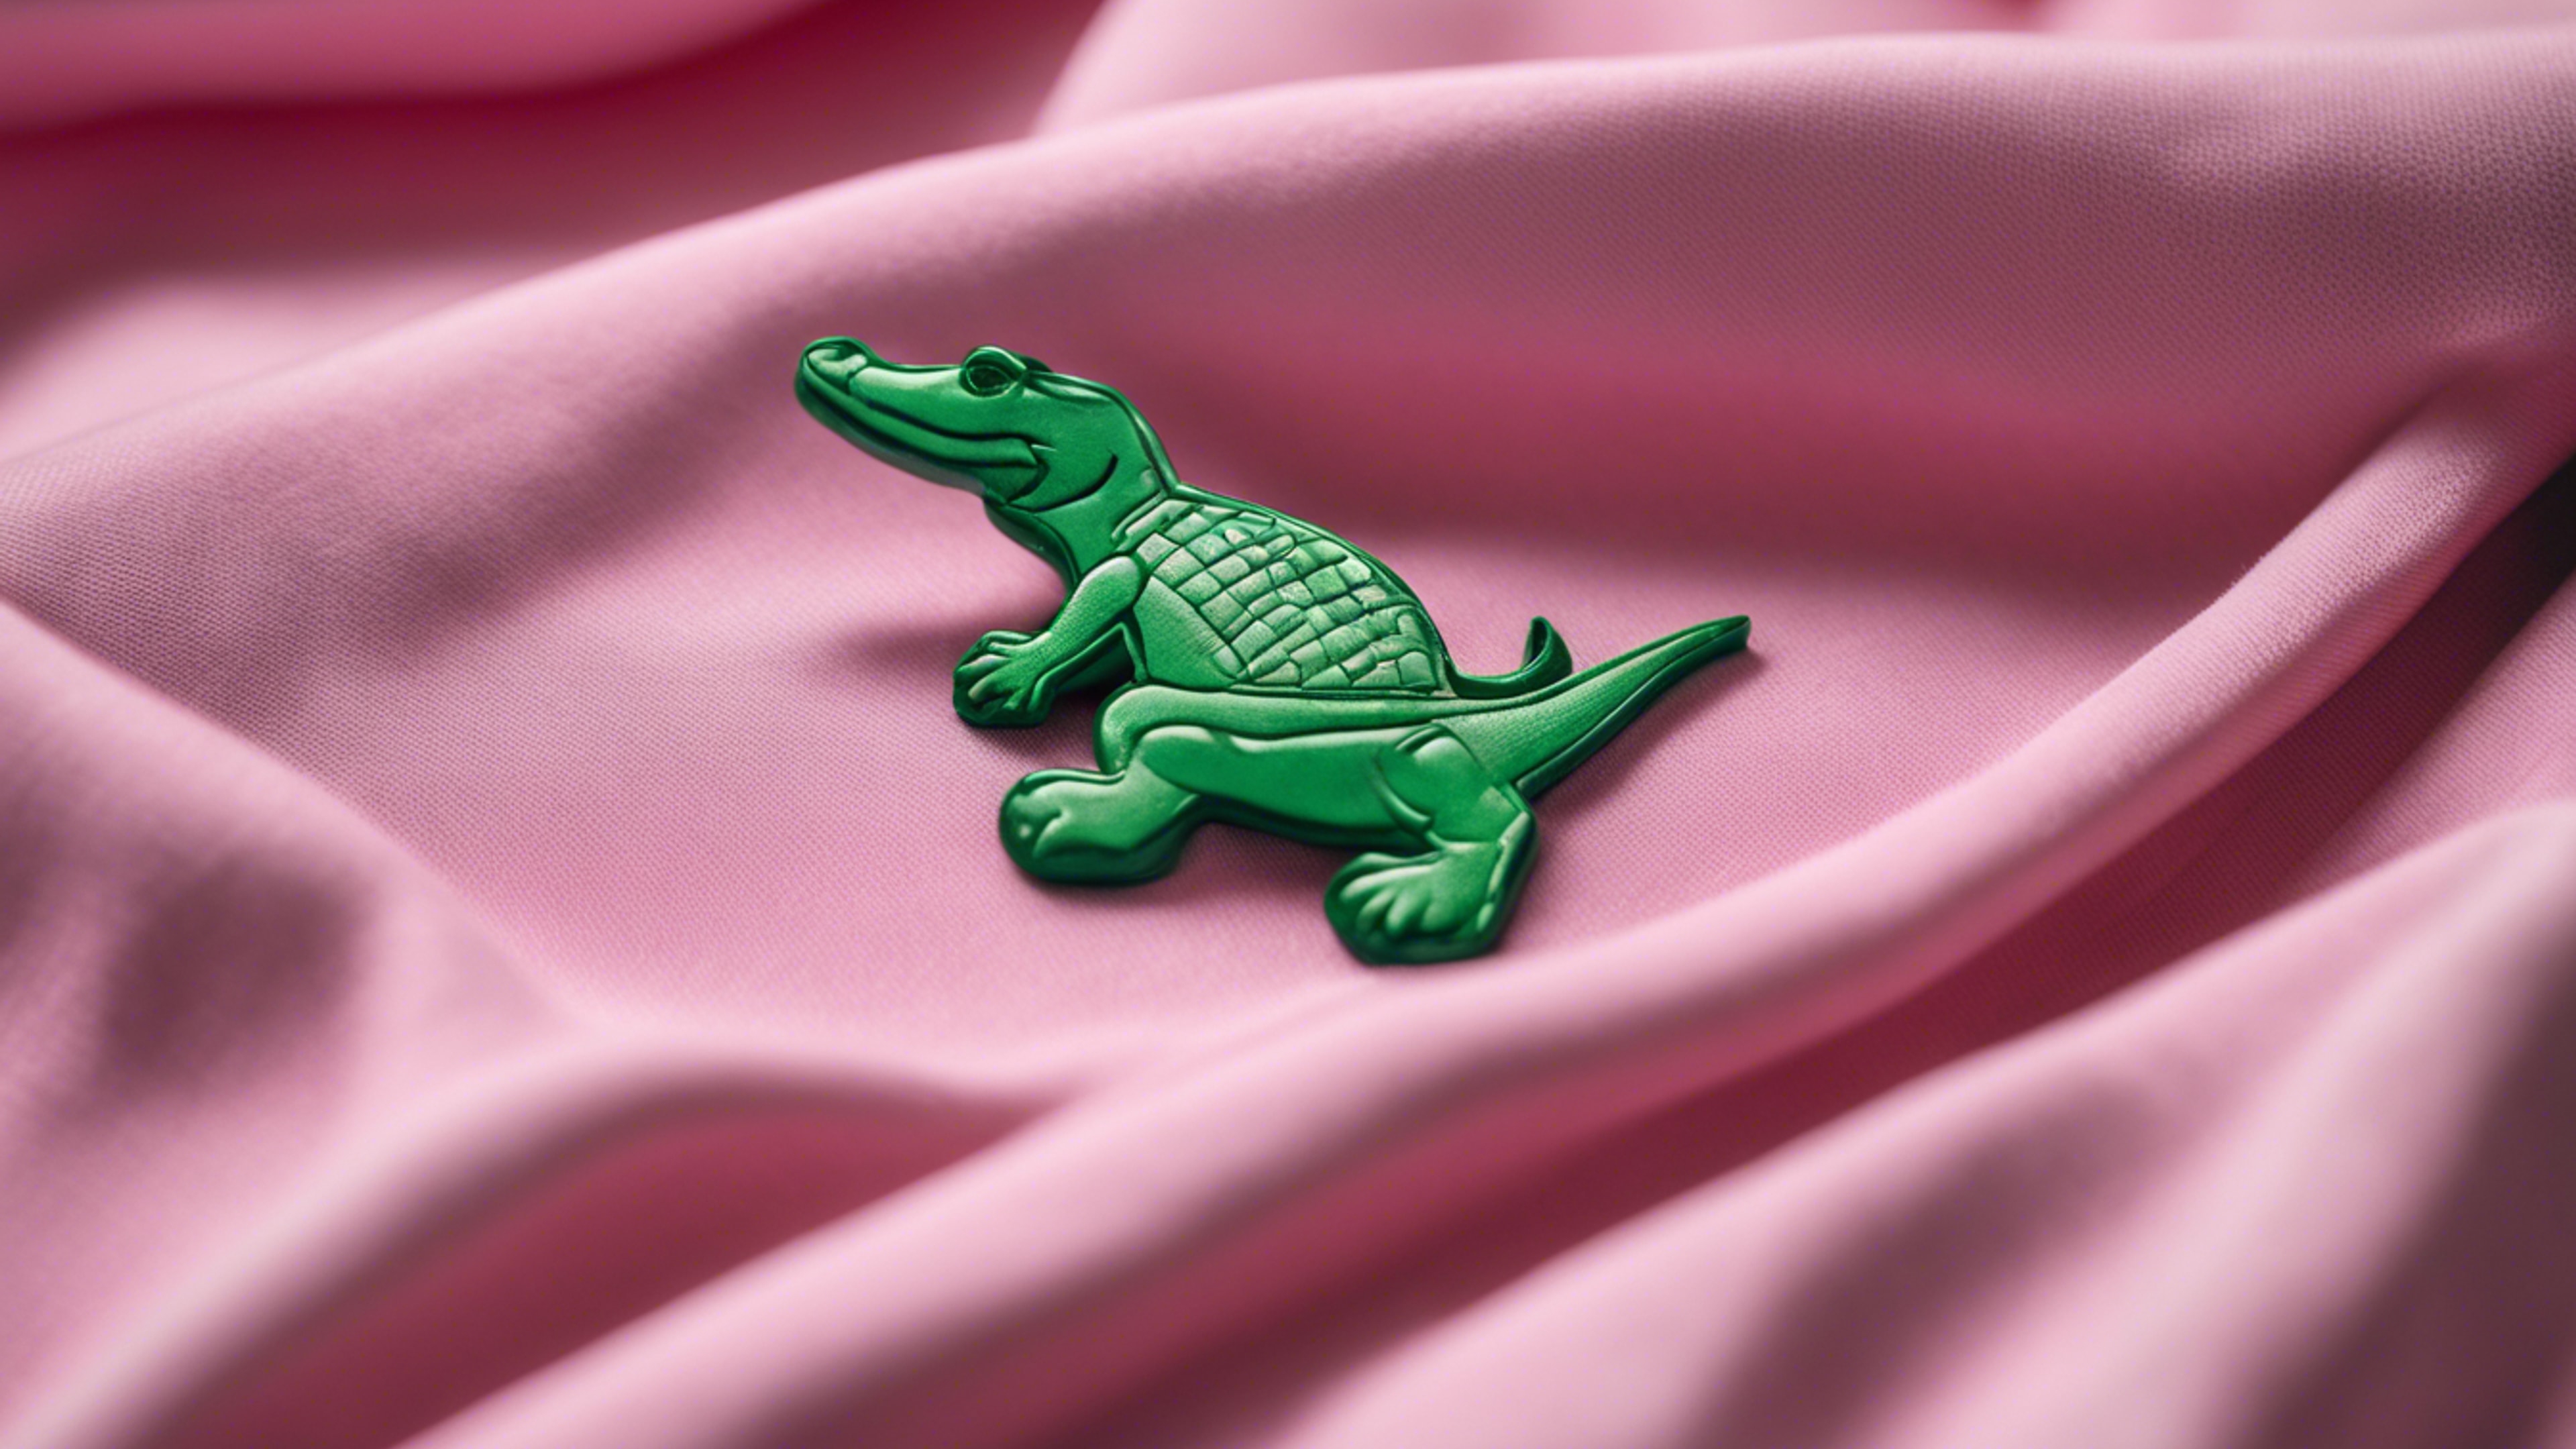 A pink polo shirt with a green alligator logo, folded neatly on a bed. Tapeta[63d9ff960abf421e89a8]